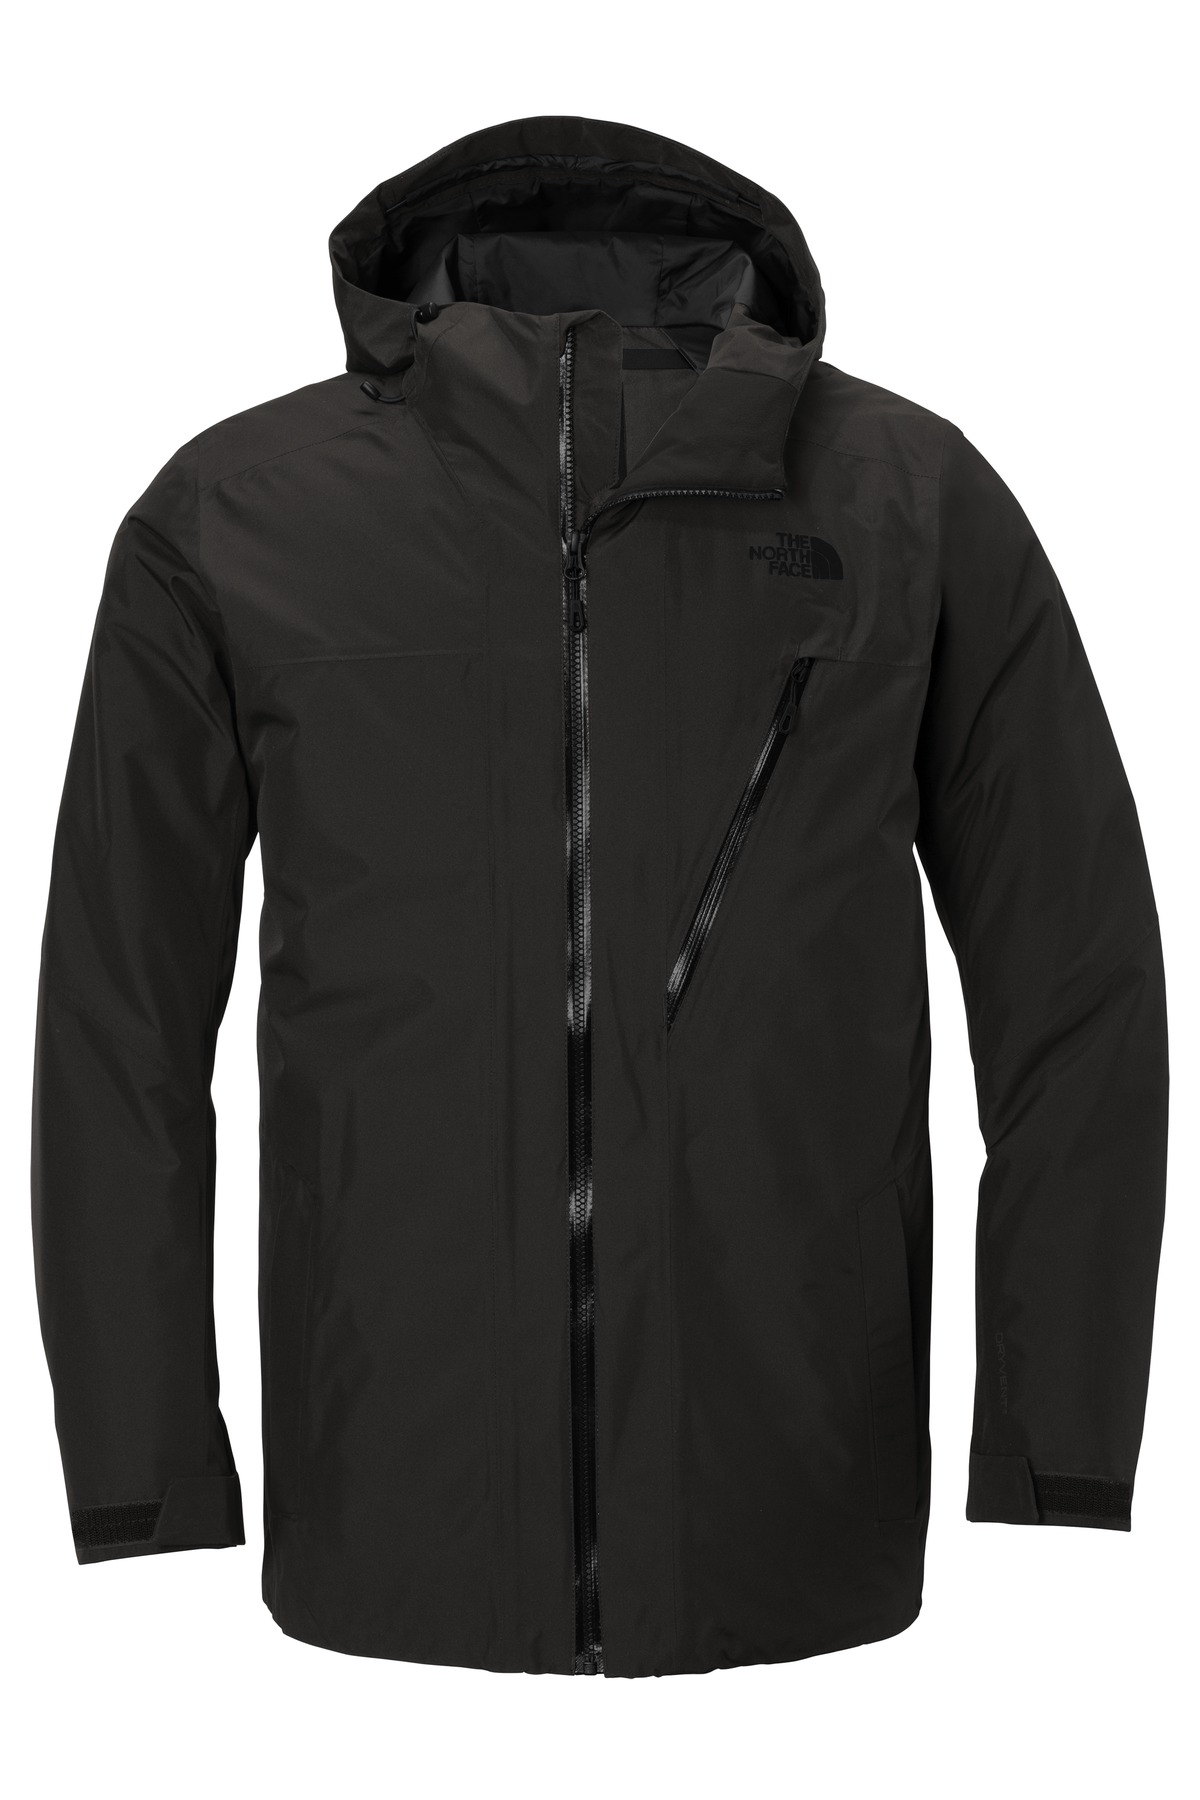 The North Face ® Ascendent Insulated Jacket . NF0A3SES - Custom Shirt Shop